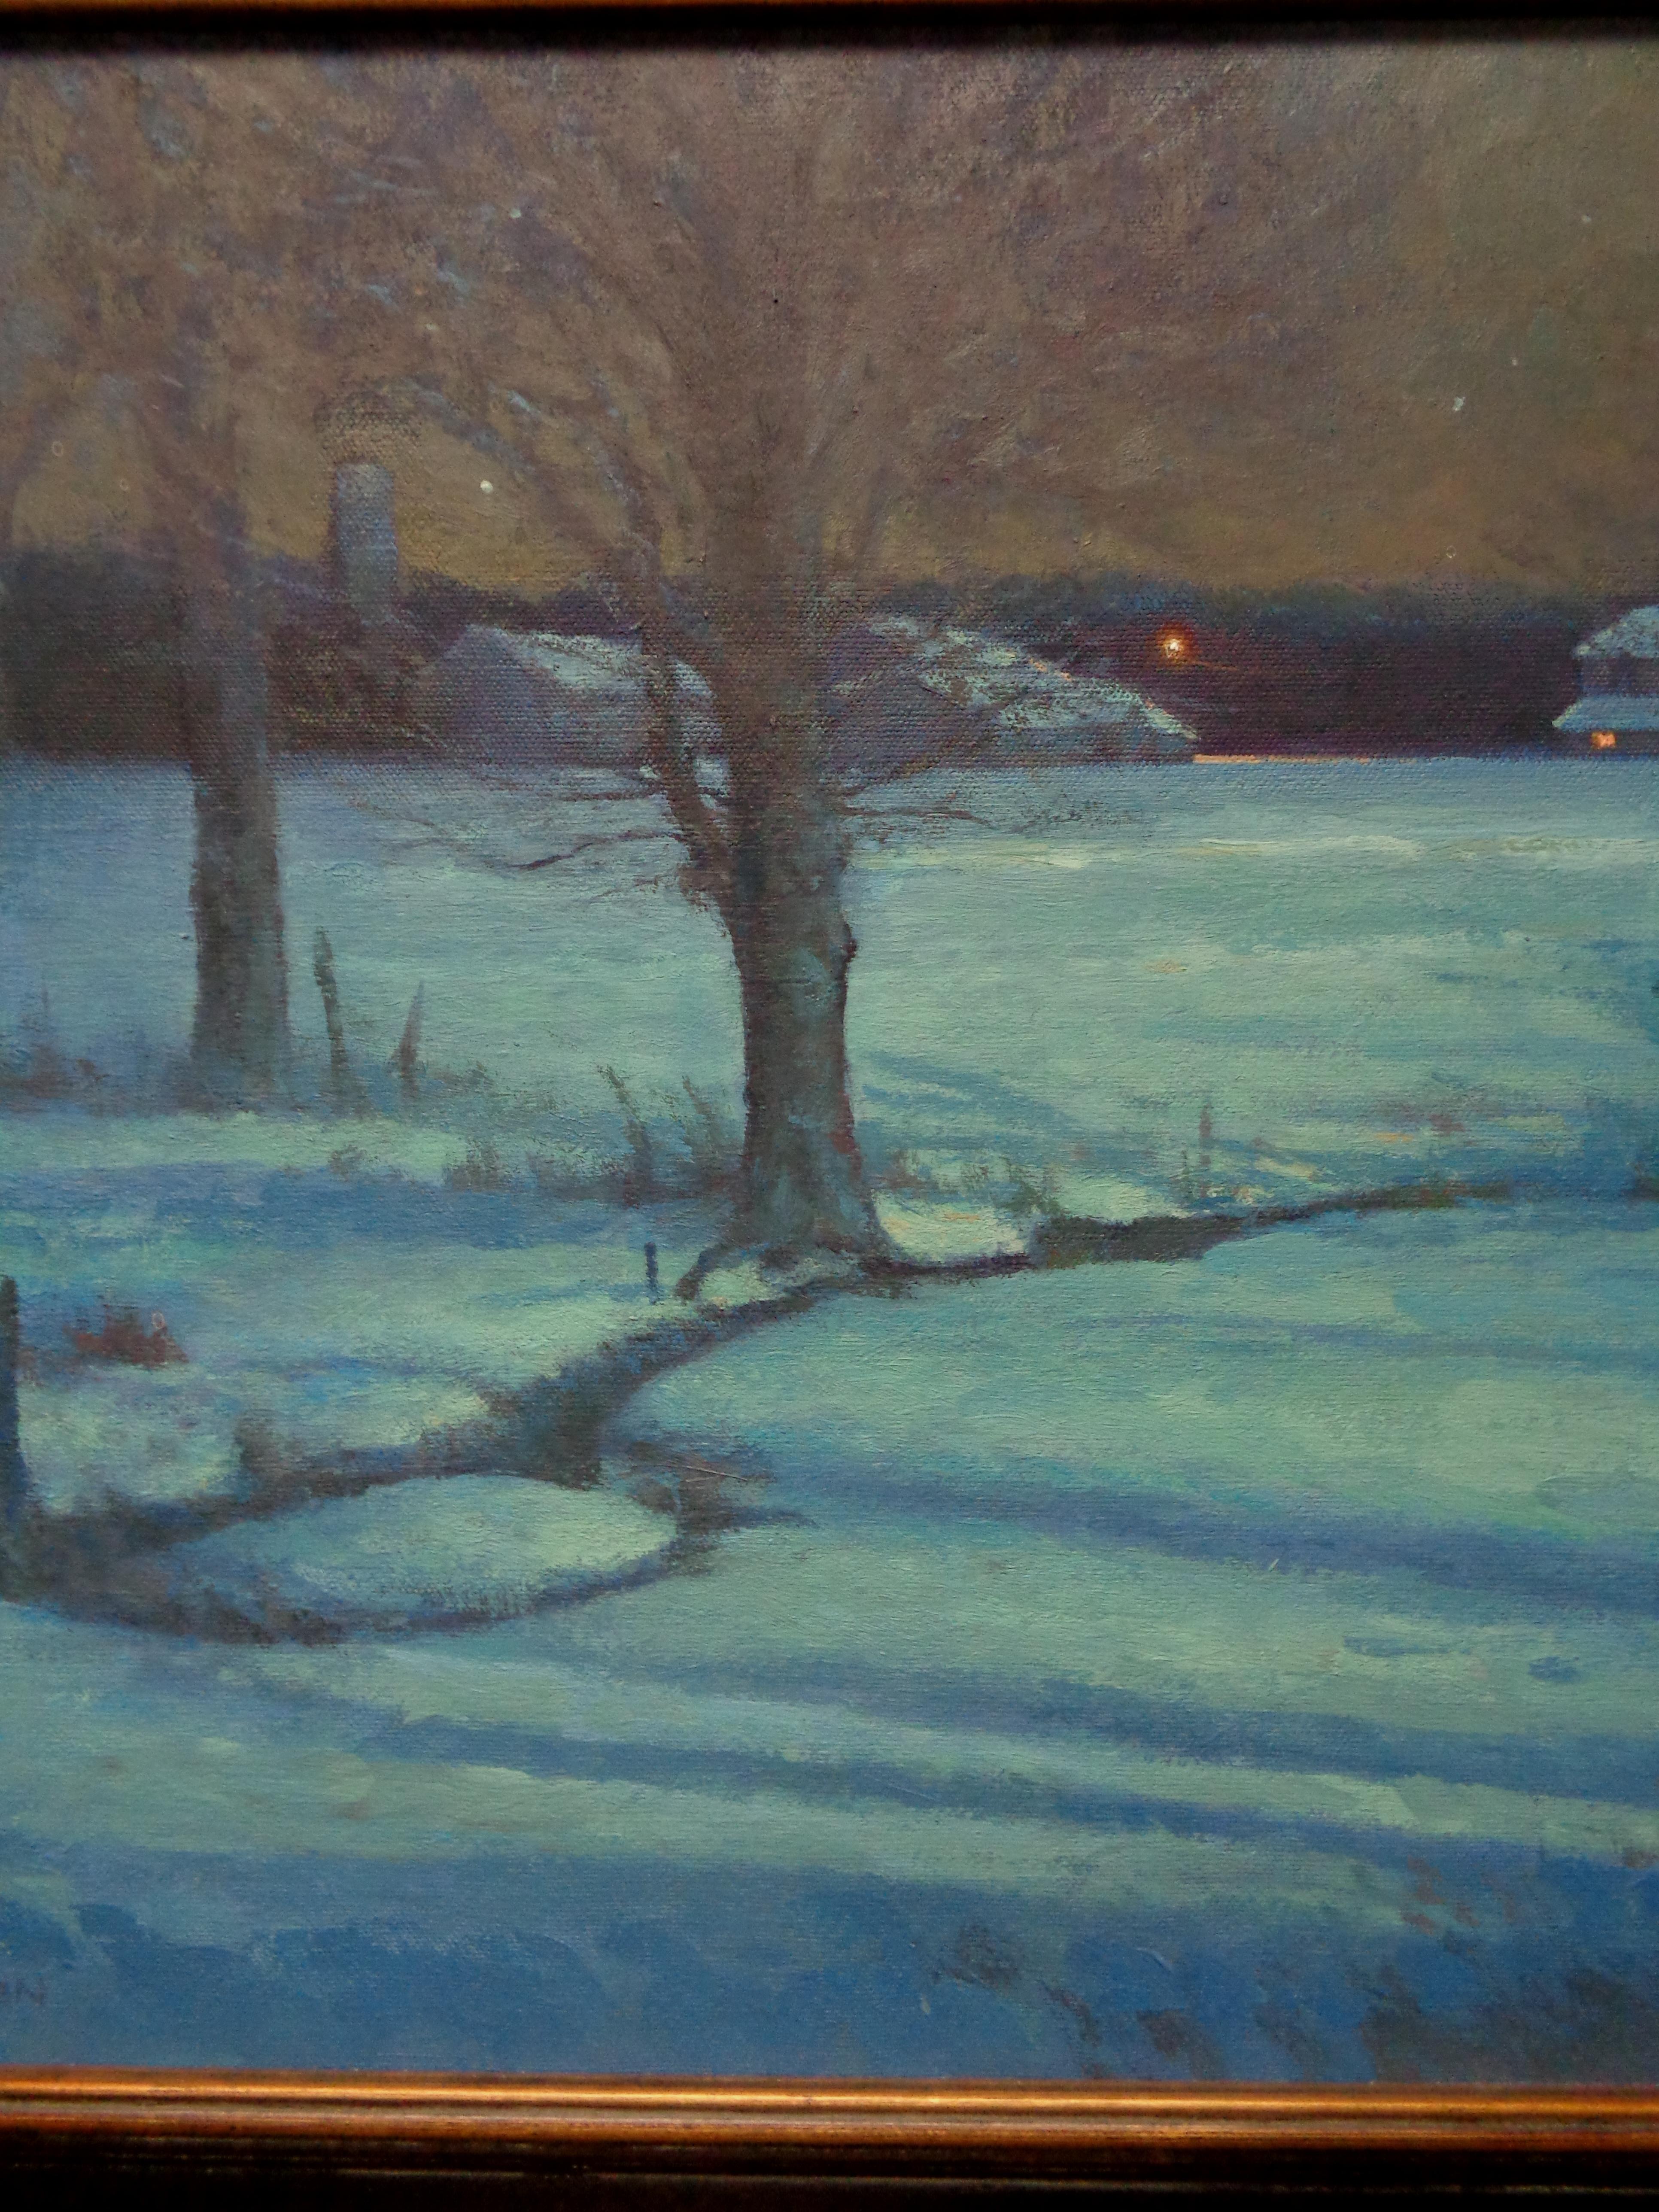  Winter Moonlight Nocturne Snow Scene Landscape Oil Painting by Michael Budden For Sale 2